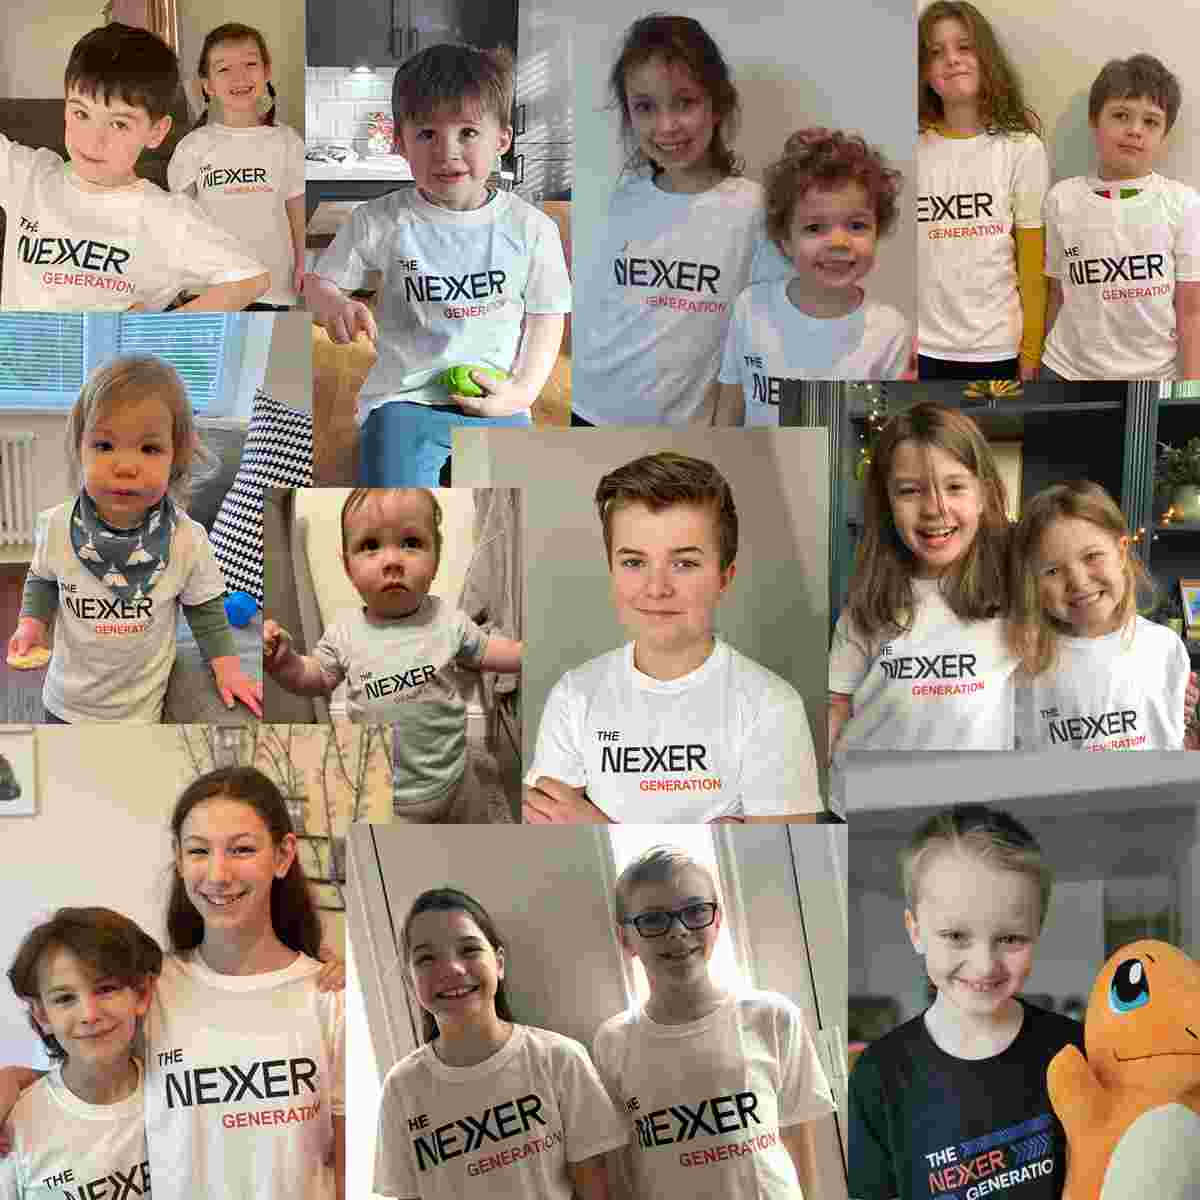 a montage of lots of happy children, smilling. They are all wearing t-shirts with the words "The Nexer Generation" displayed.